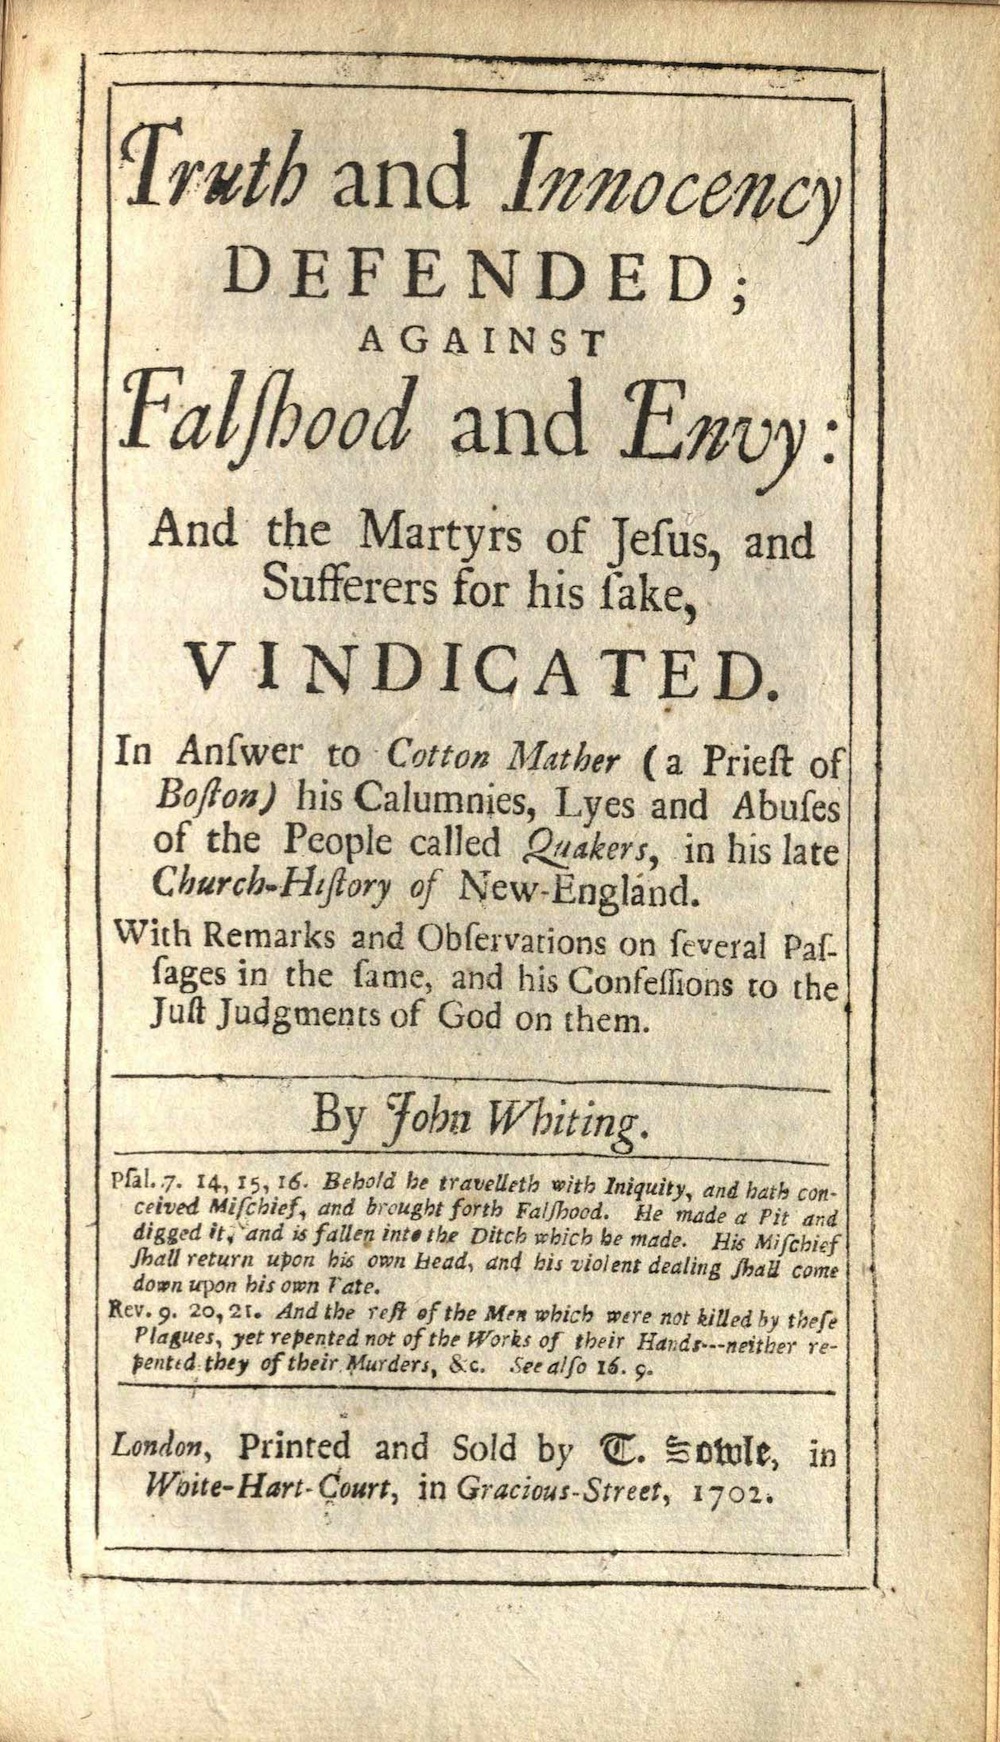 Whiting, Truth and innocency defended, 1702